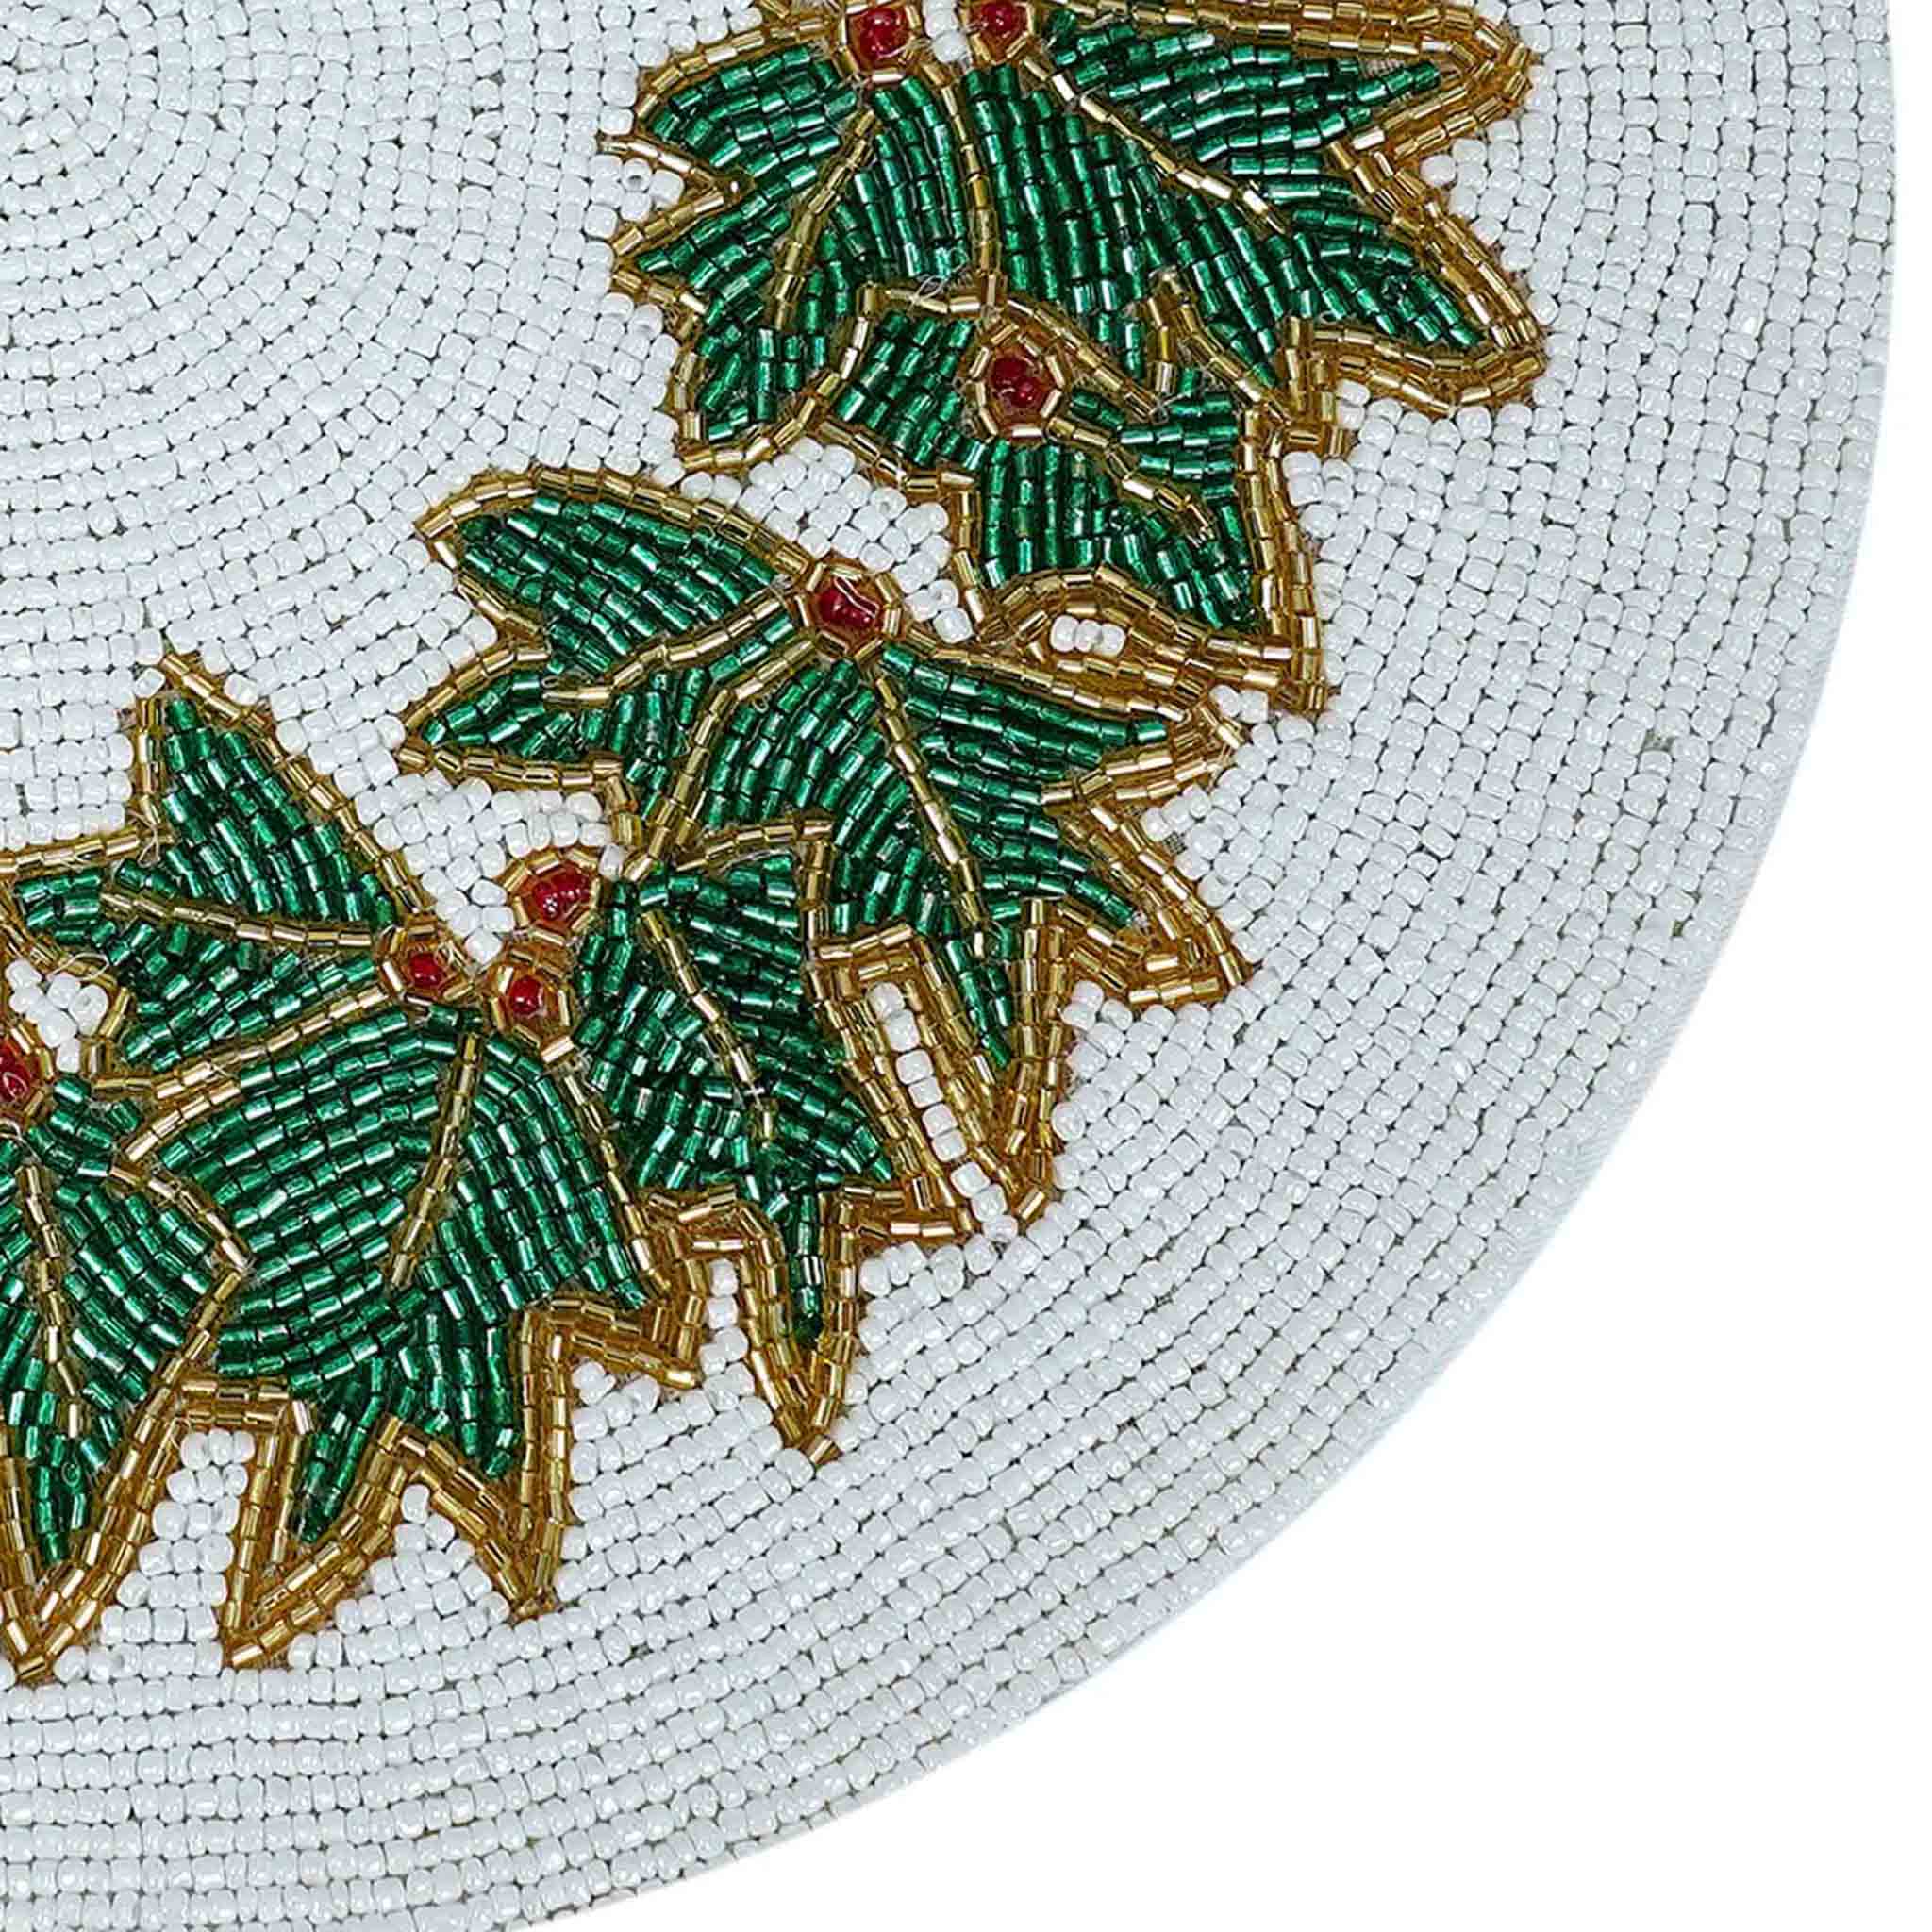 Holly Berry Bead Embroidered Placemat in White, Red & Green, Set of 2/4